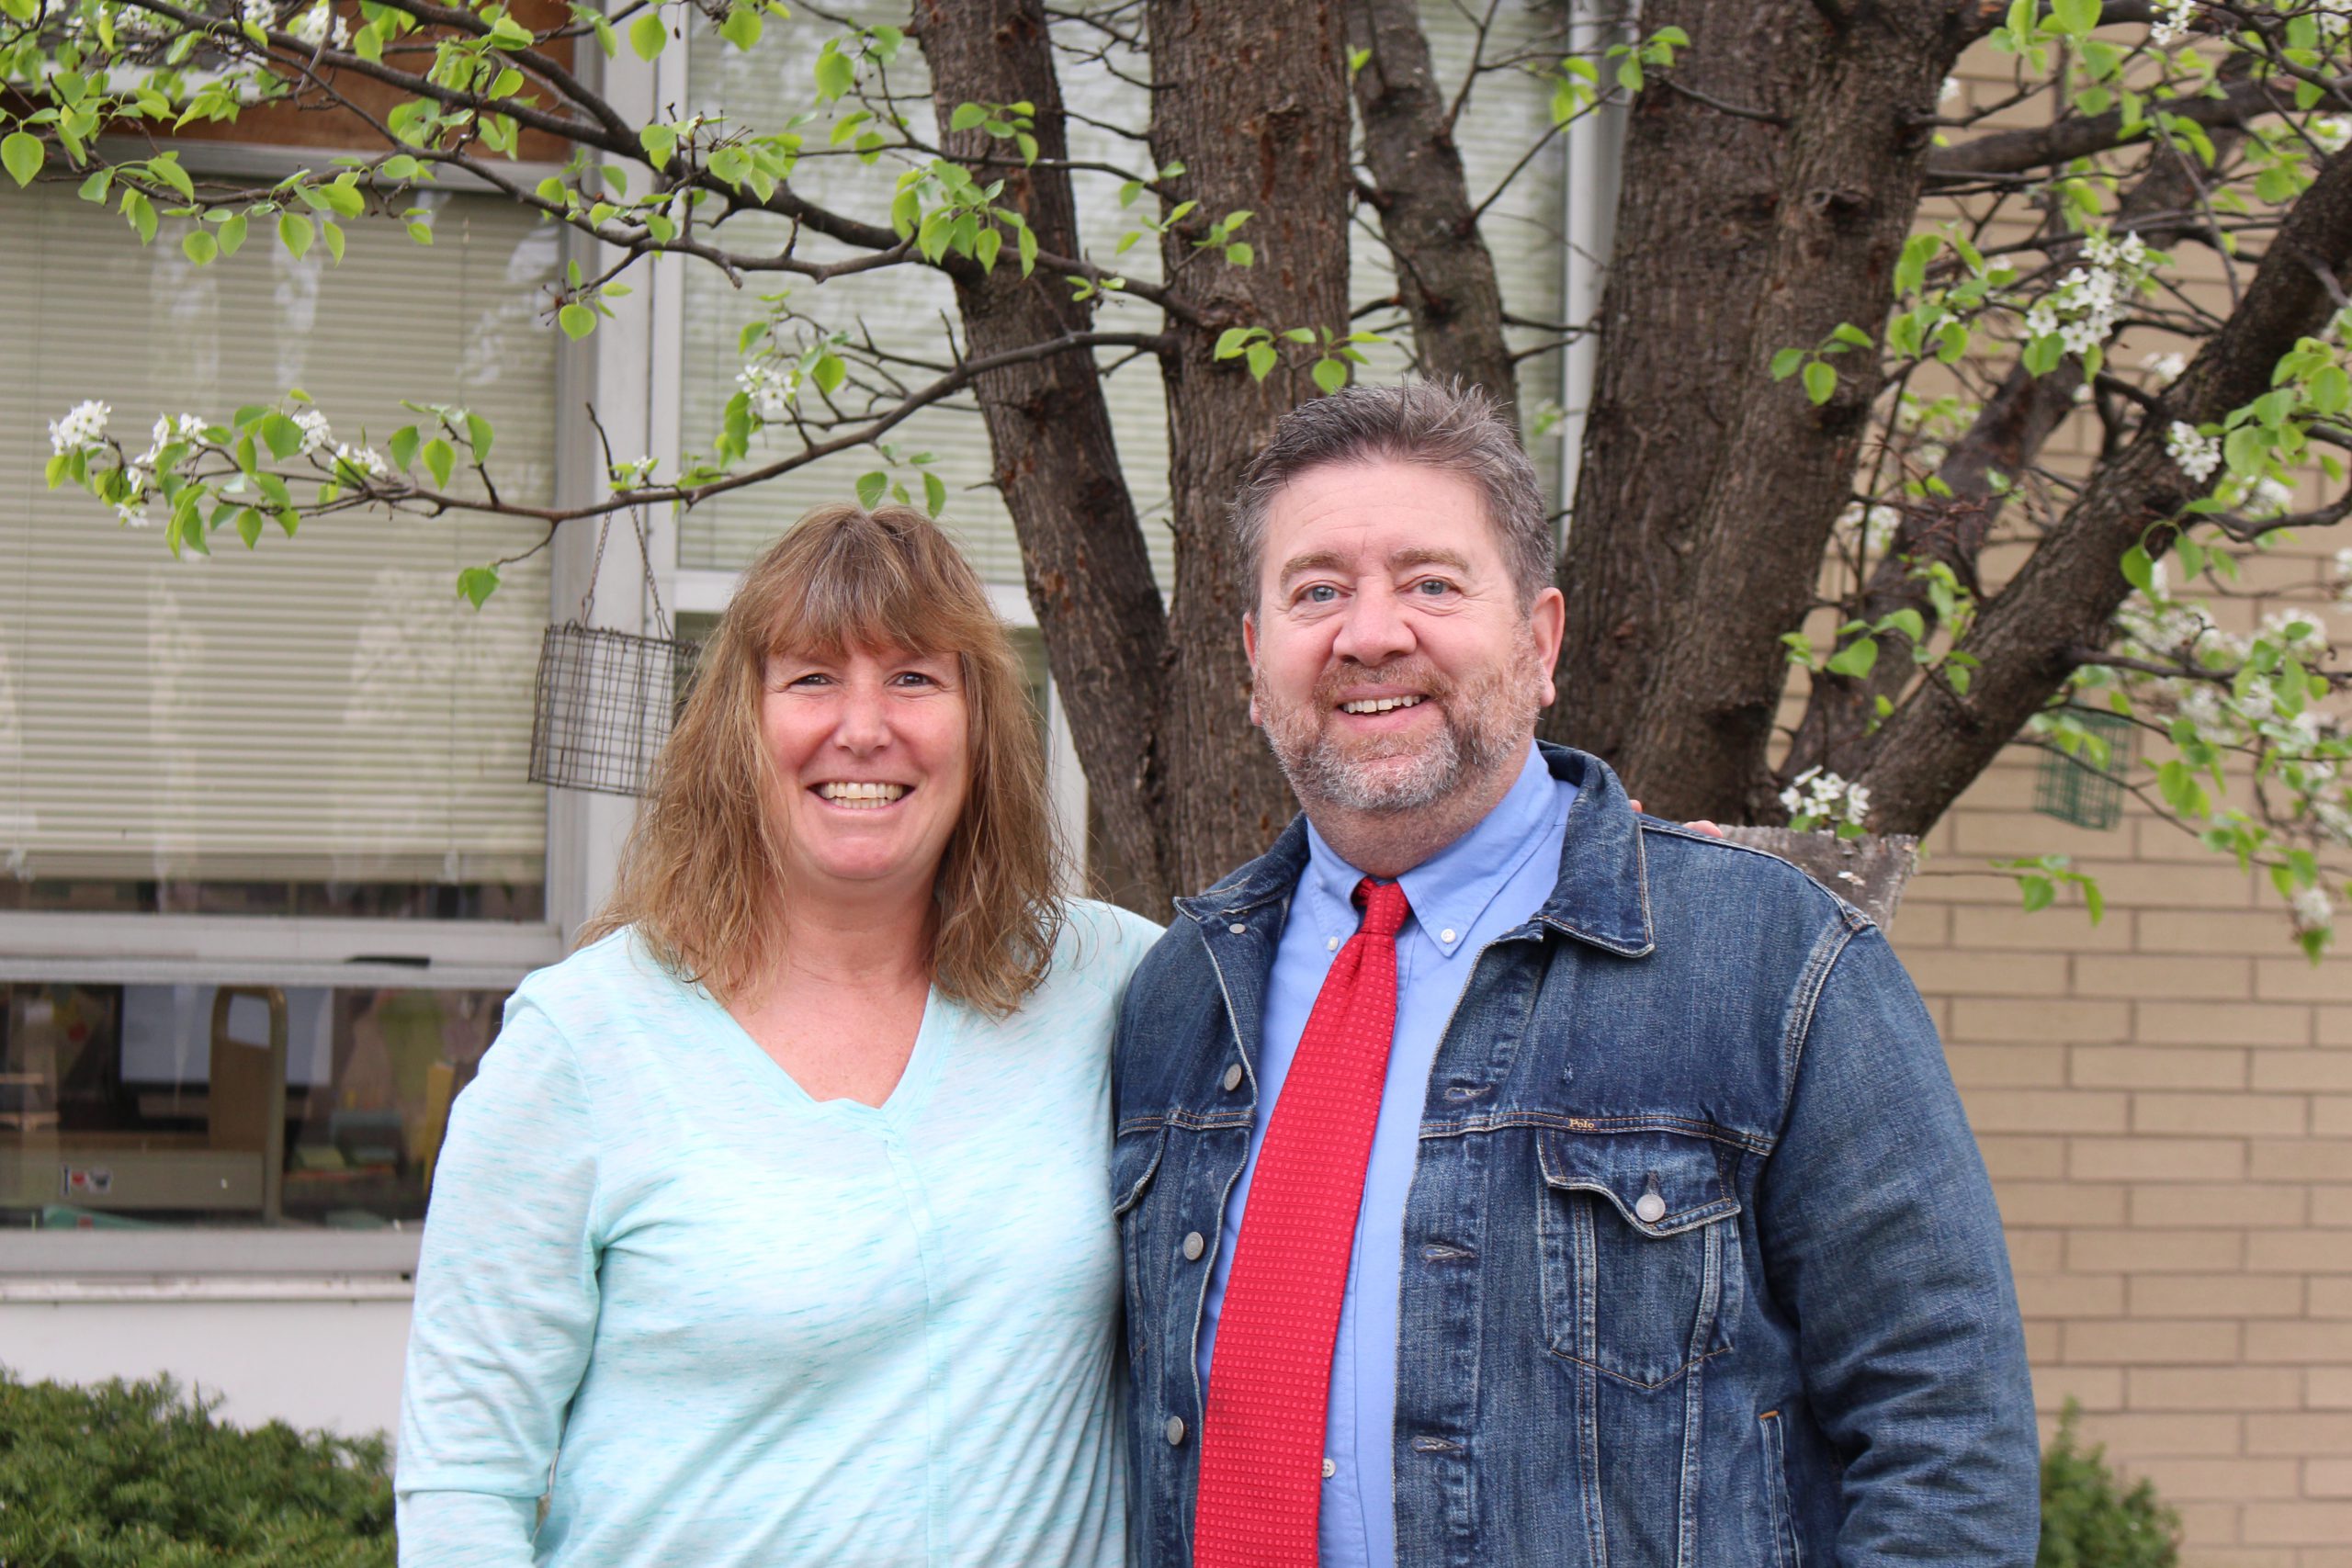 Ann Marie Kurthy and Bill Frandino are smiling next to a tree and posing 